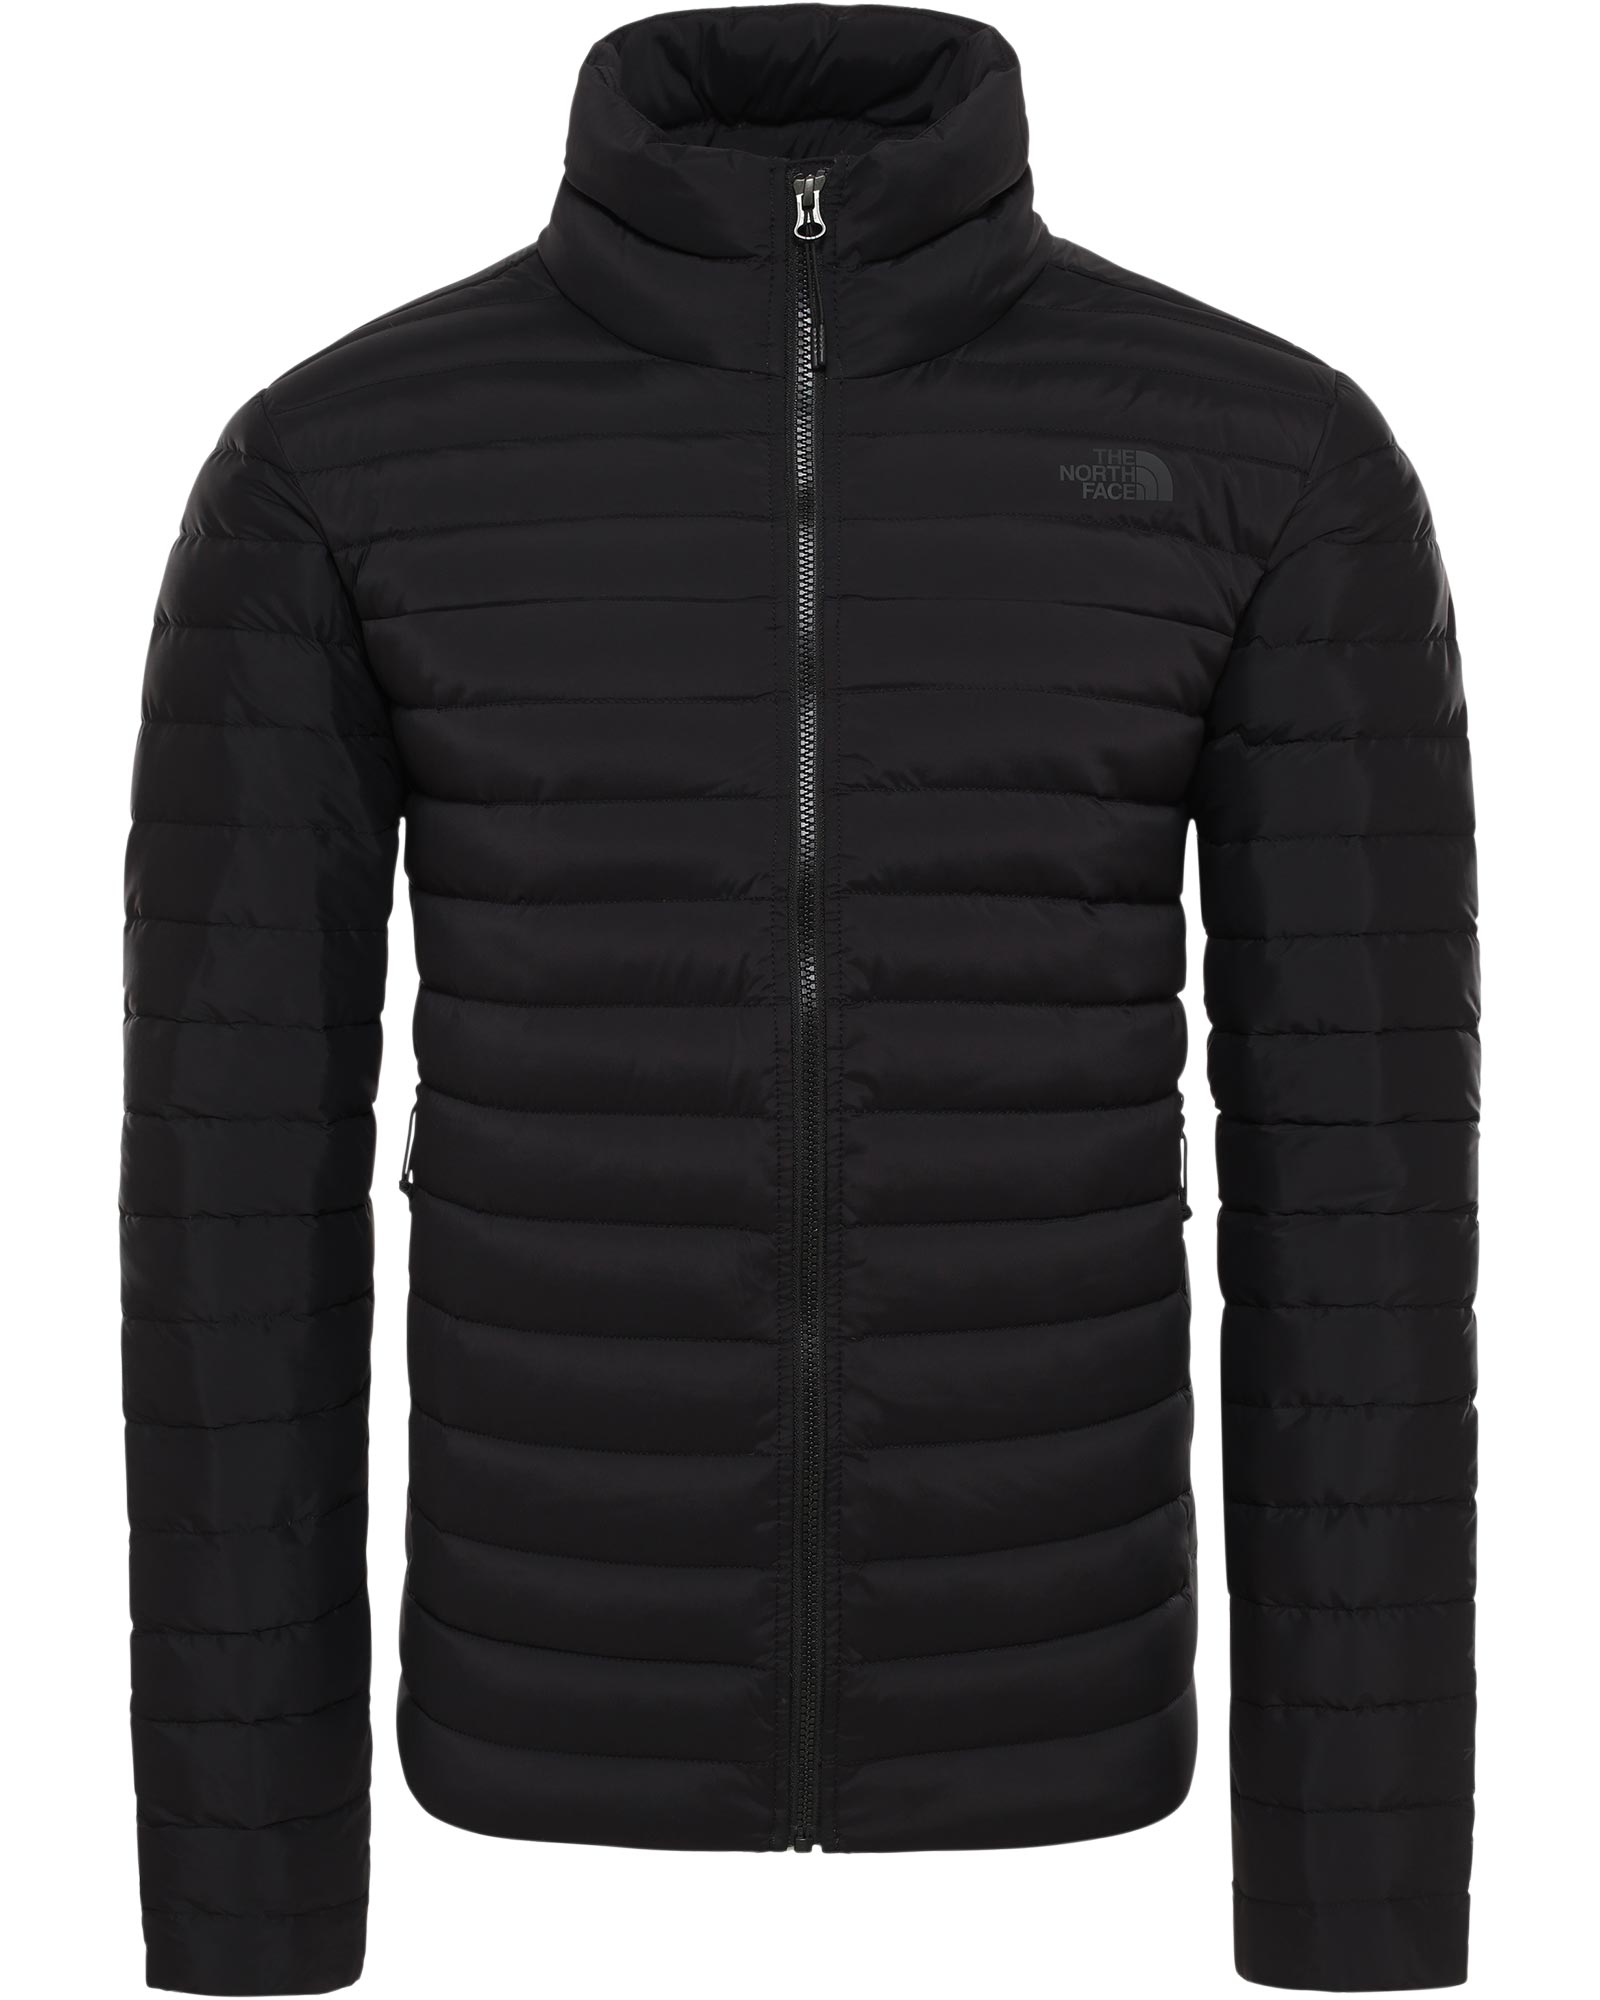 The North Face Stretch Down Men’s Jacket - TNF Black S